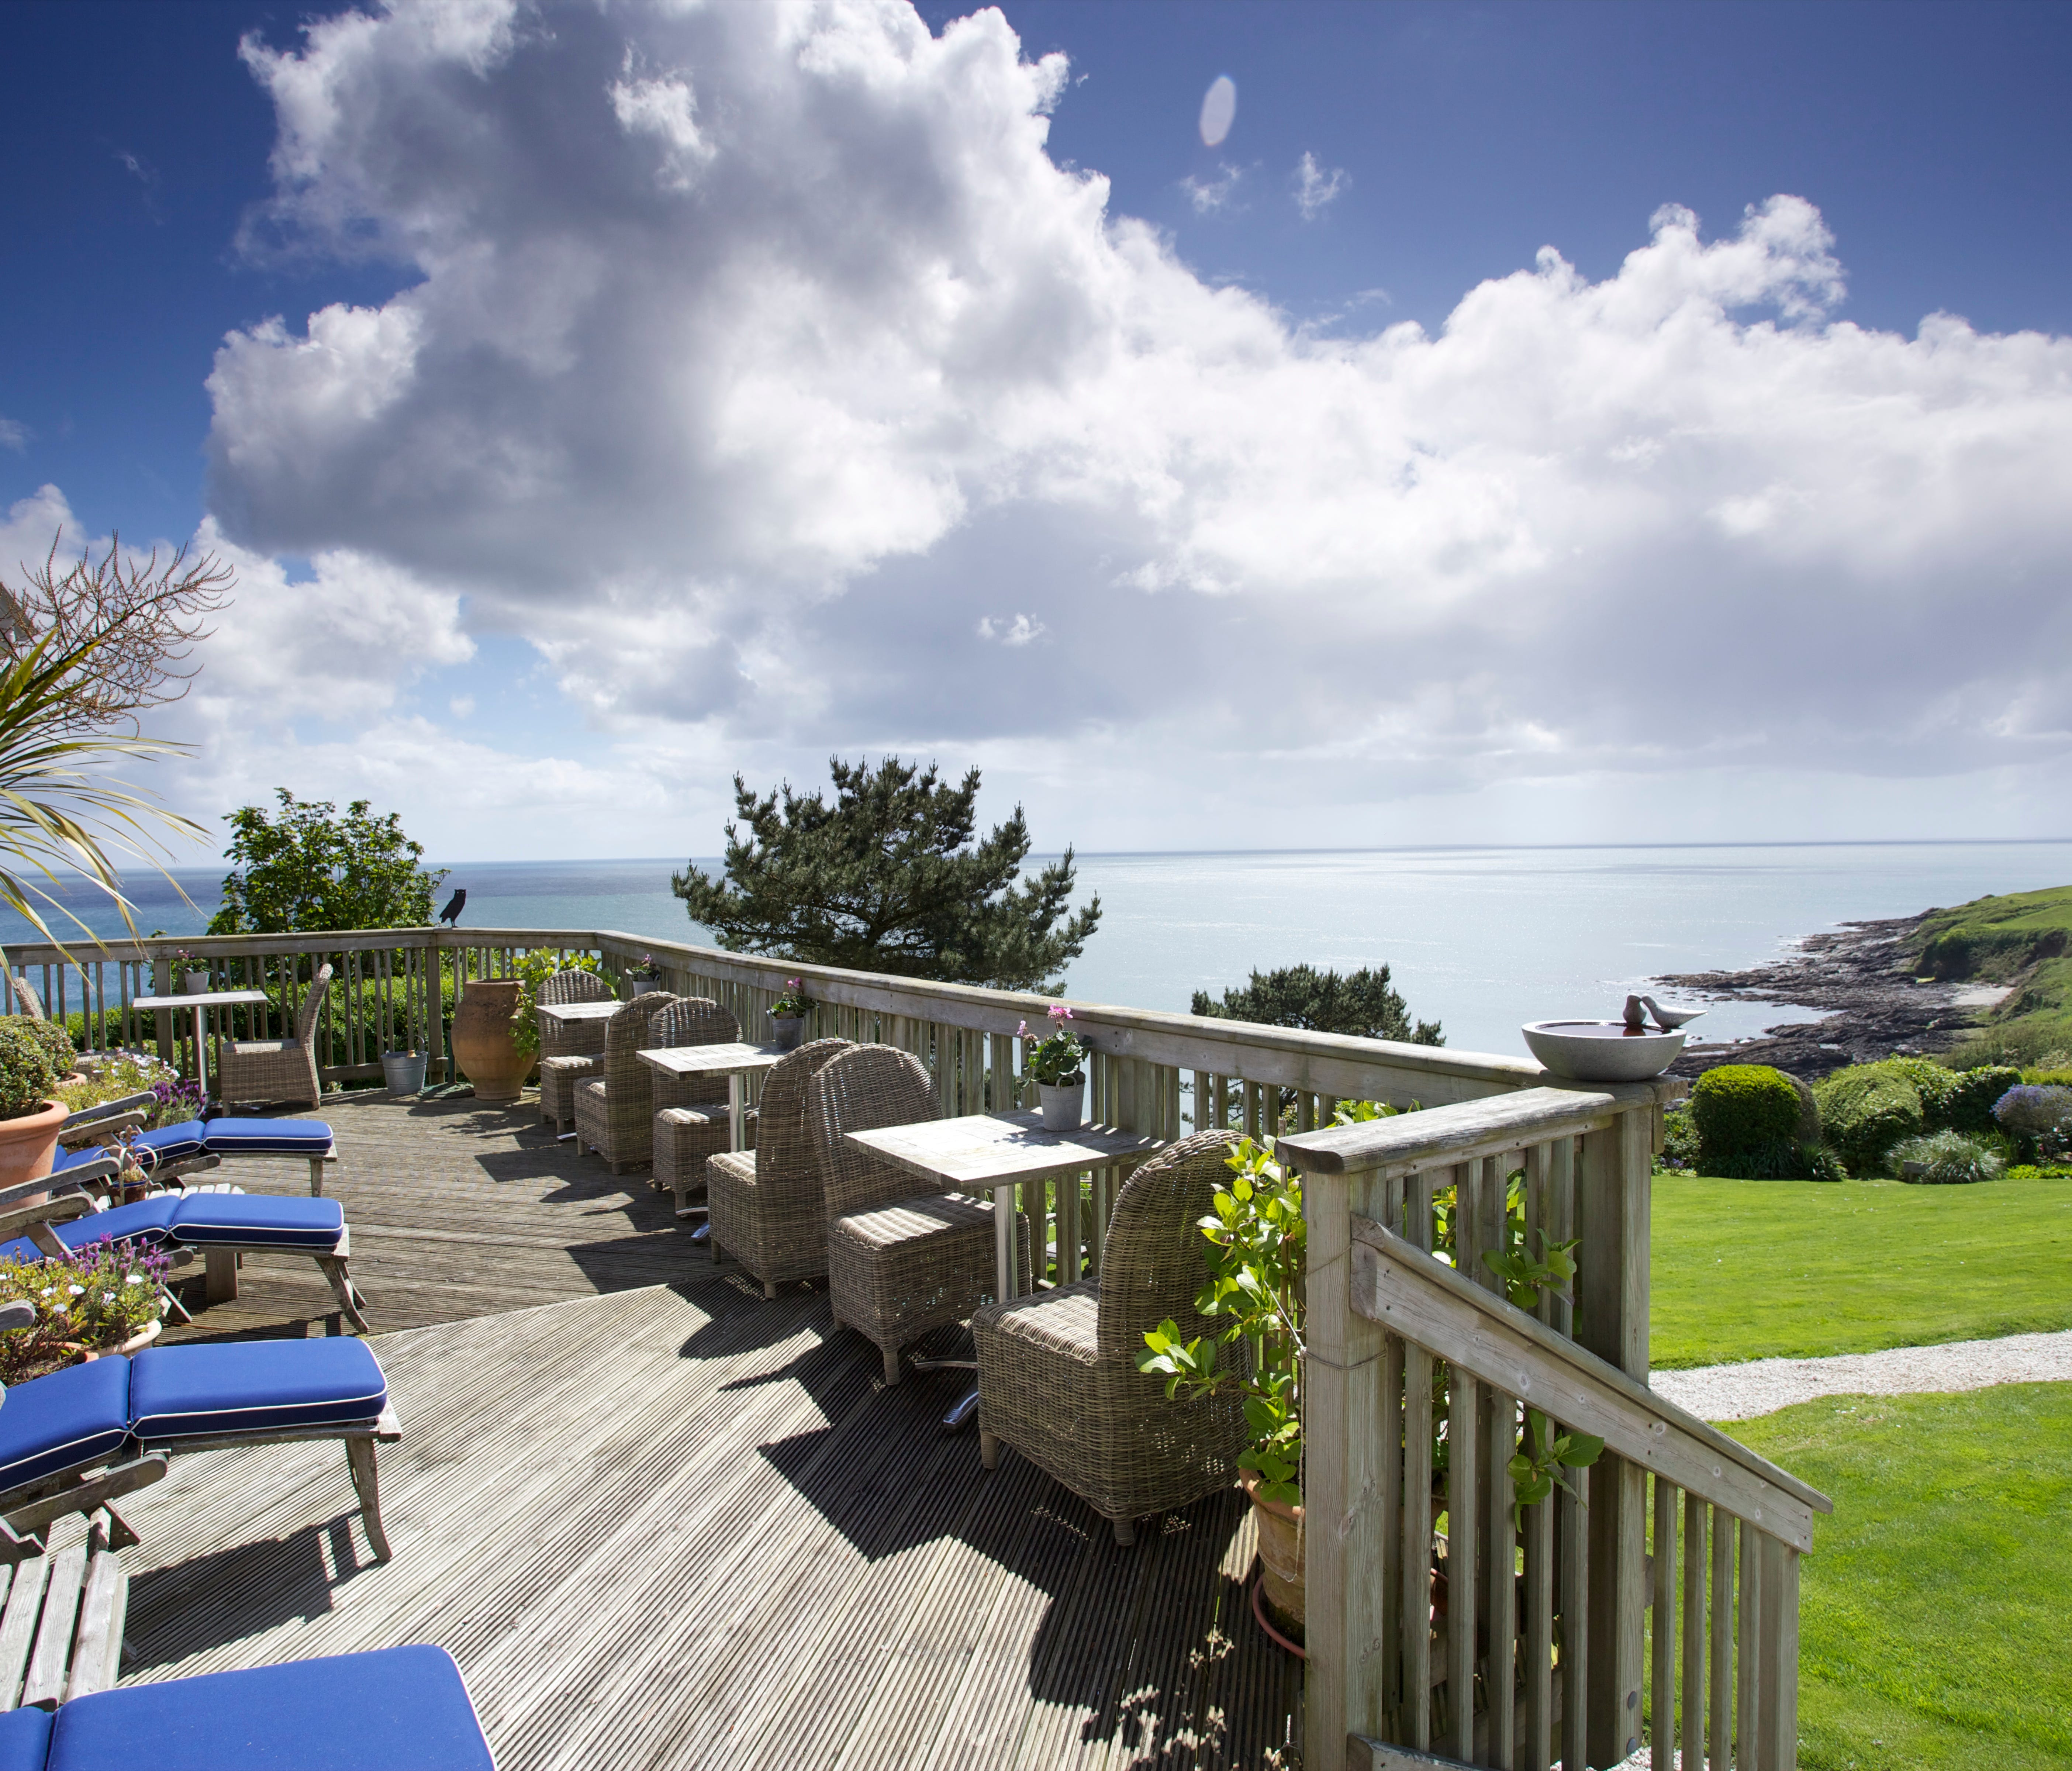 Driftwood, Portscatho, Cornwall: Follow the woodland path that winds down through the landscaped garden to a private beach from this New-England-inspired hotel overlooking Gerrans Bay, or sink into an Adirondack chair on the lawn and soak up the view